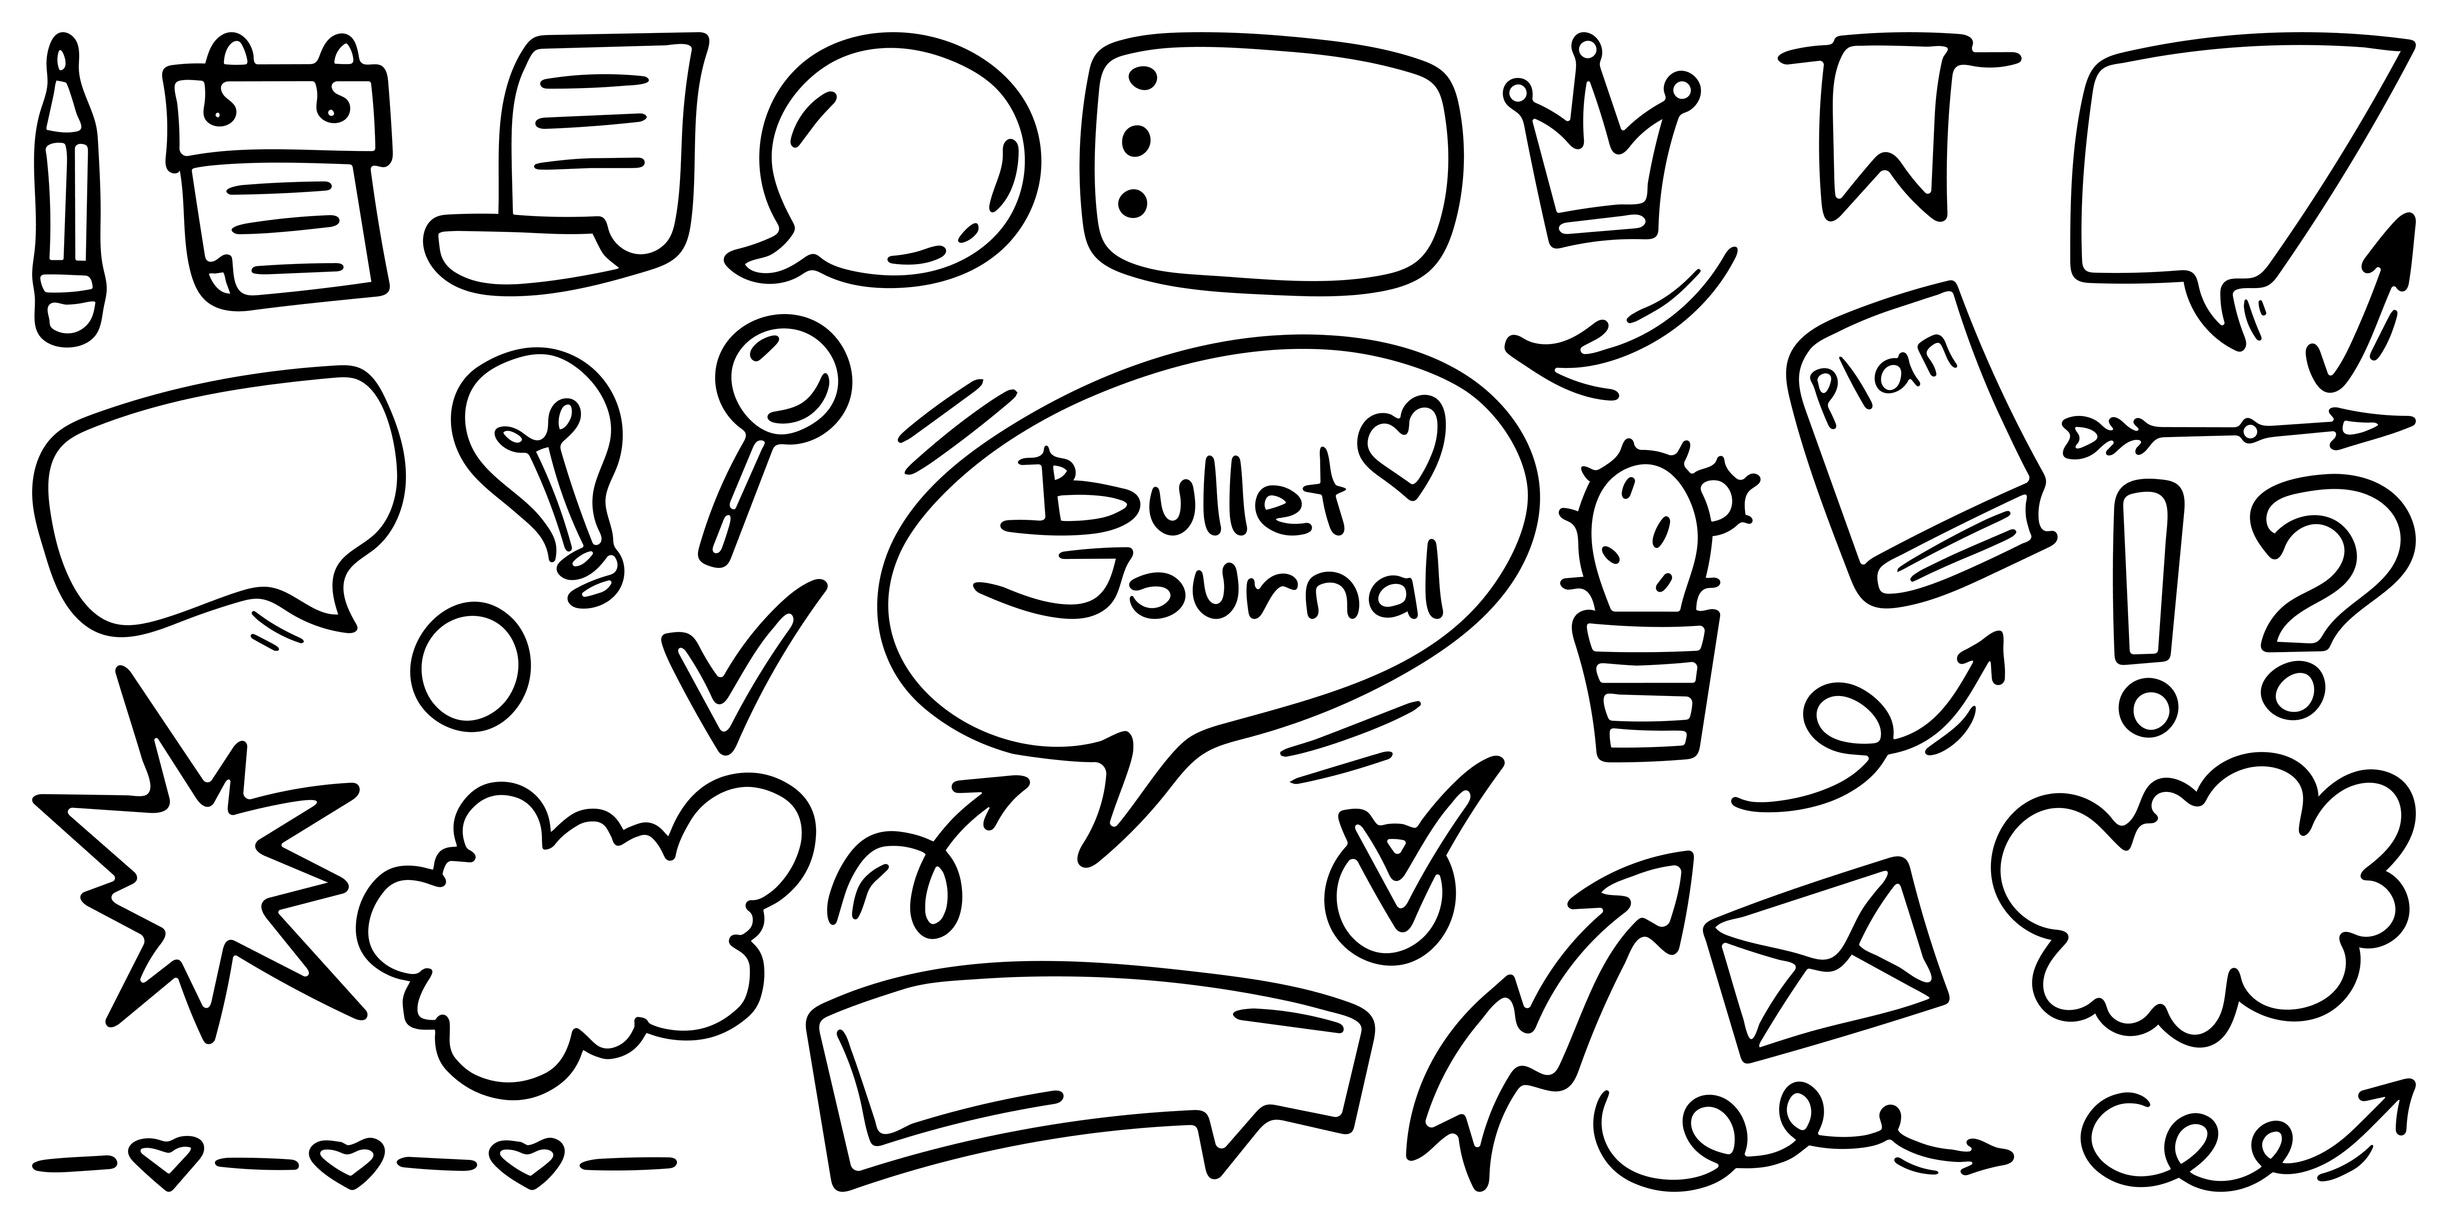  A white background with writing and drawings including speech bubbles and arrows. The large centre speech bubble says 'Bullet Journal'. 